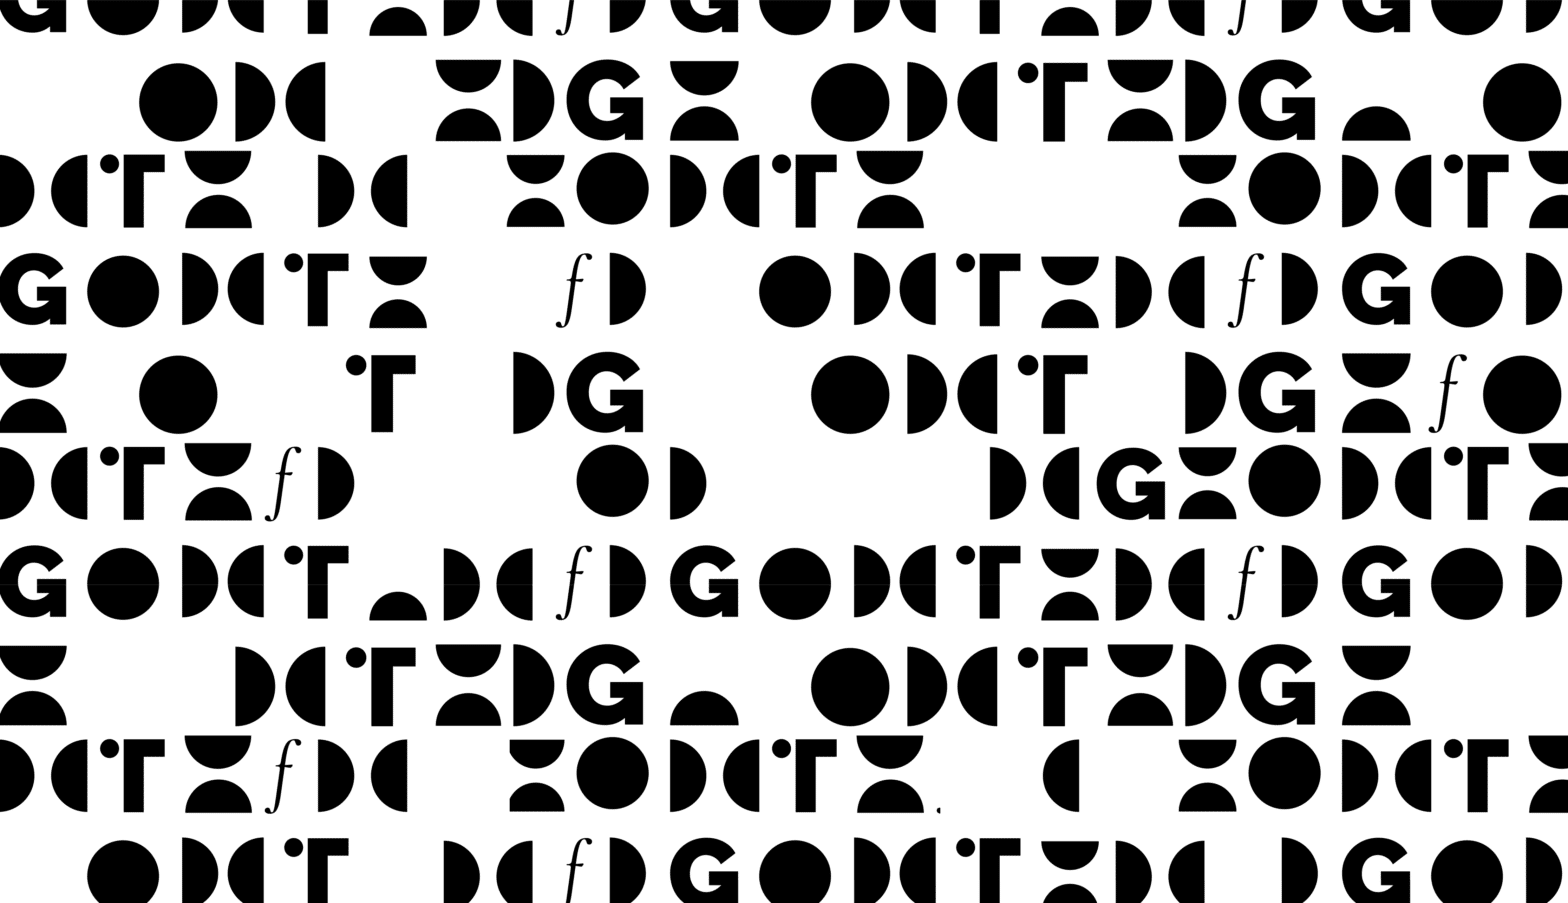 Black pattern of shapes - part of The Typeface Group branding